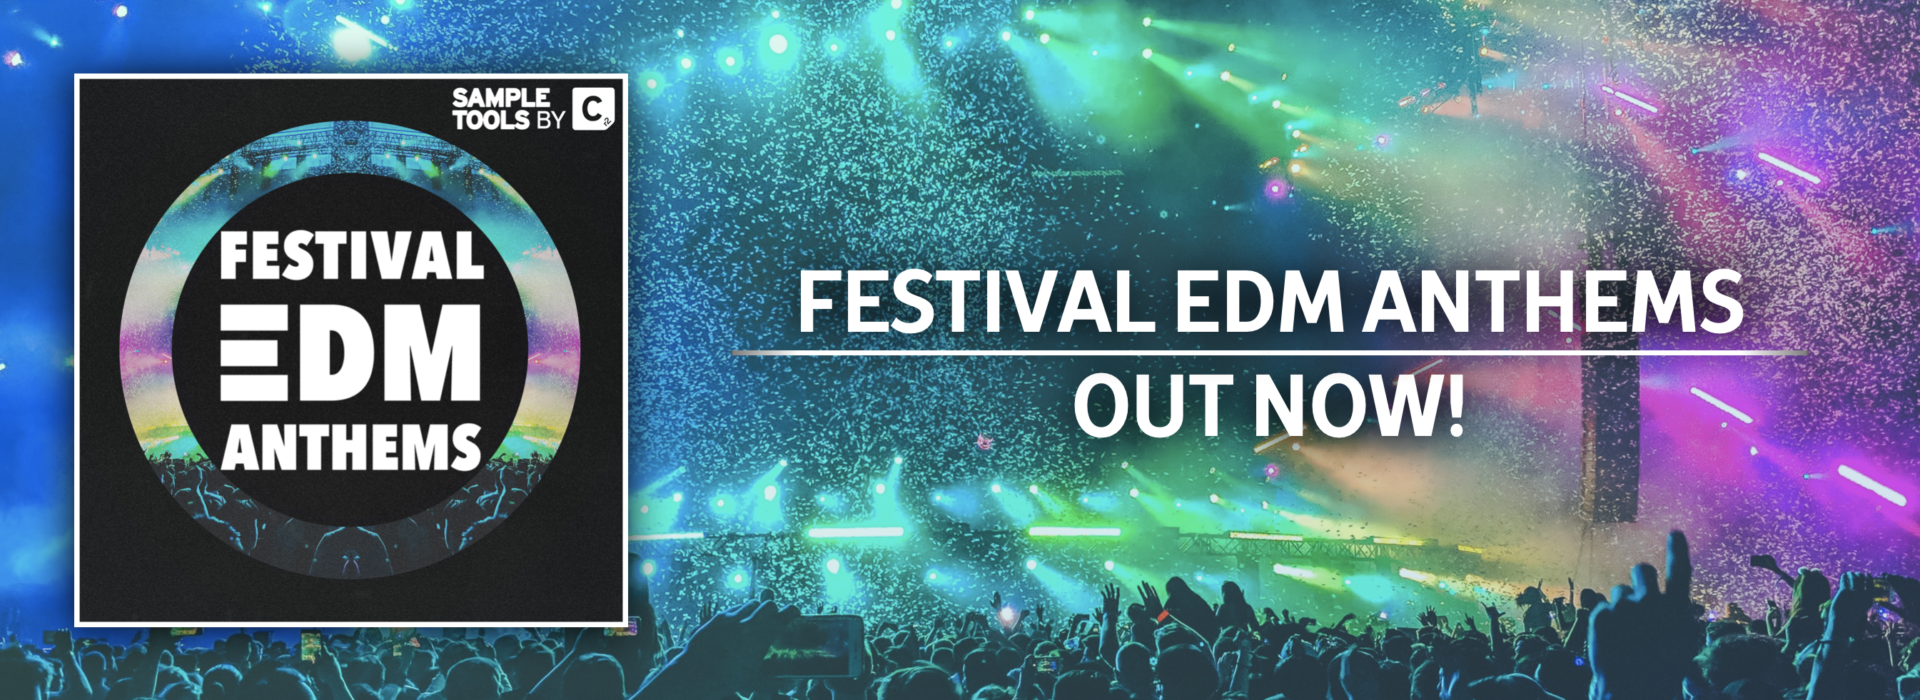 OUT NOW: FESTIVAL EDM ANTHEMS